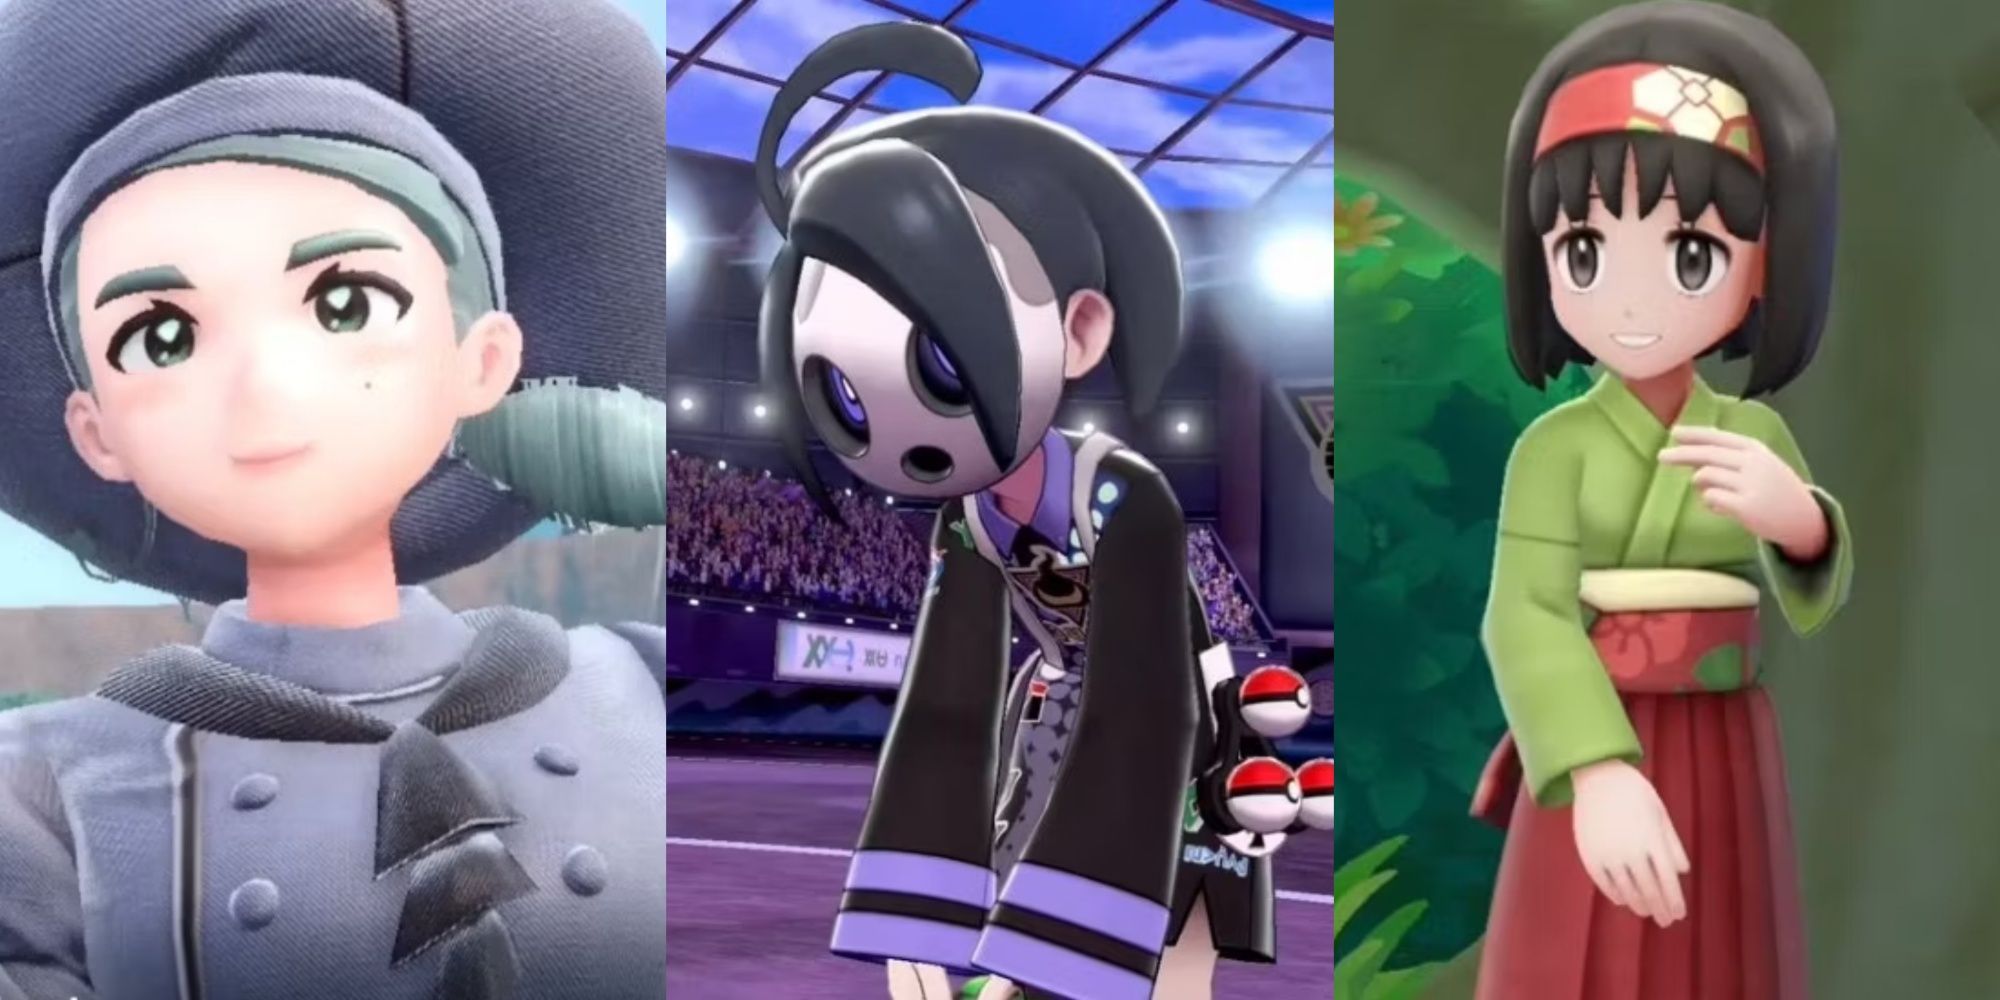 Split images of the Pokemon gym leaders Katy, Allister, and Erika